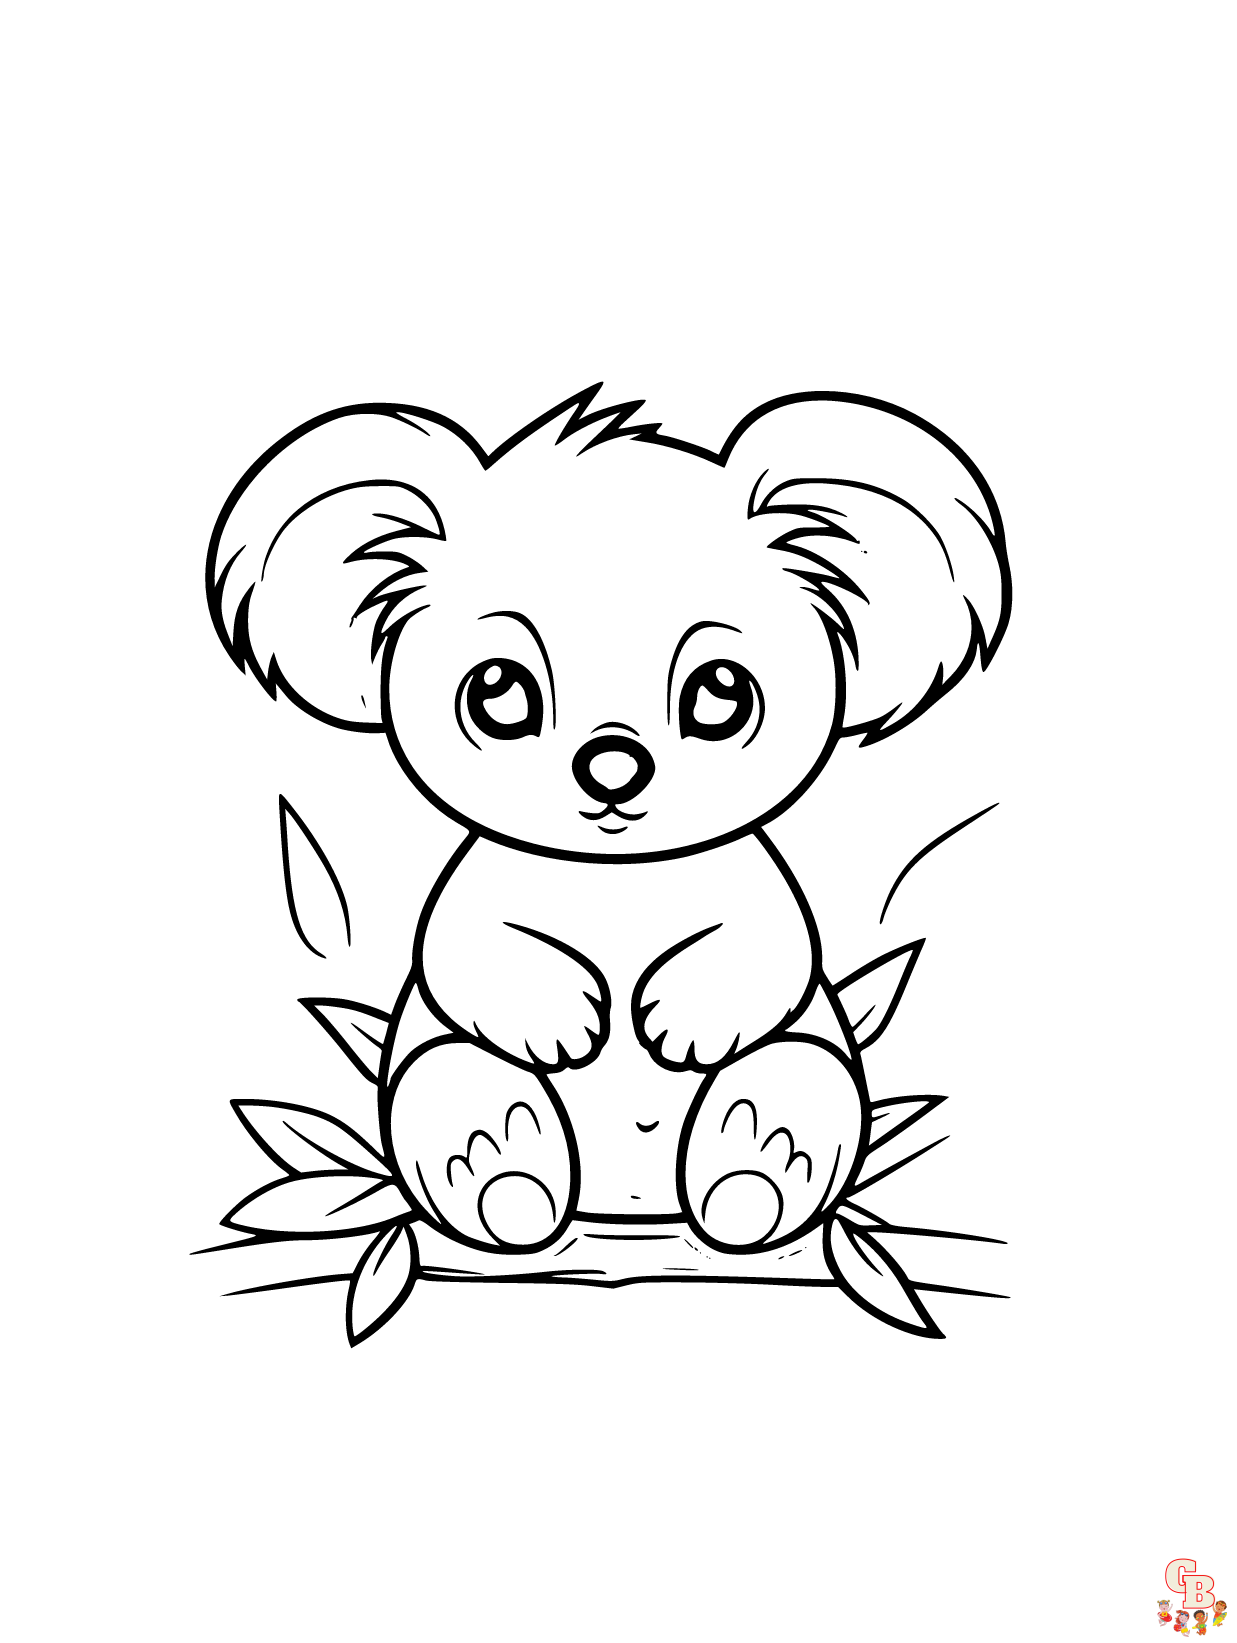 Free Koala coloring pages for kids